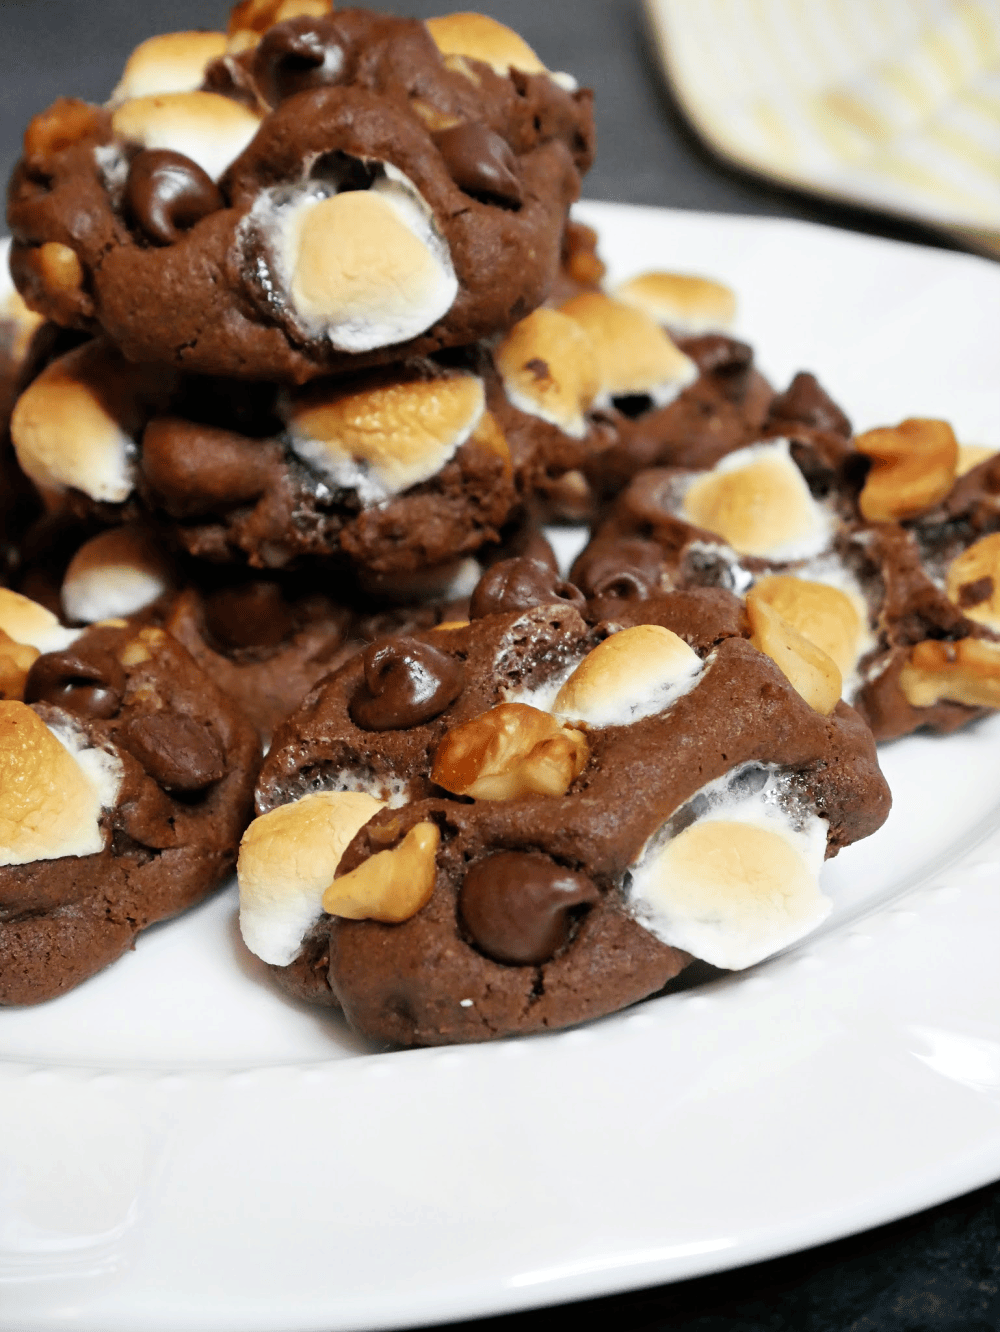 I'm a huge Gilmore Girls fan. In a Season One episode, Sookie made rocky road cookies for Rory to give to her boyfriend Dean and he loved them. I've made my own version of Sookie's Rocky Road Cookies. Much like rocky road ice cream, these cookies are chocolaty, nutty, marshmallow-ey, and oh-so decadent. They're also super simple to make. Basically, these Gilmore Girls-inspired Rocky Road Cookies are sweet and gooey and crunchy - everything you want in a cookie recipe. I know you're going to love them!